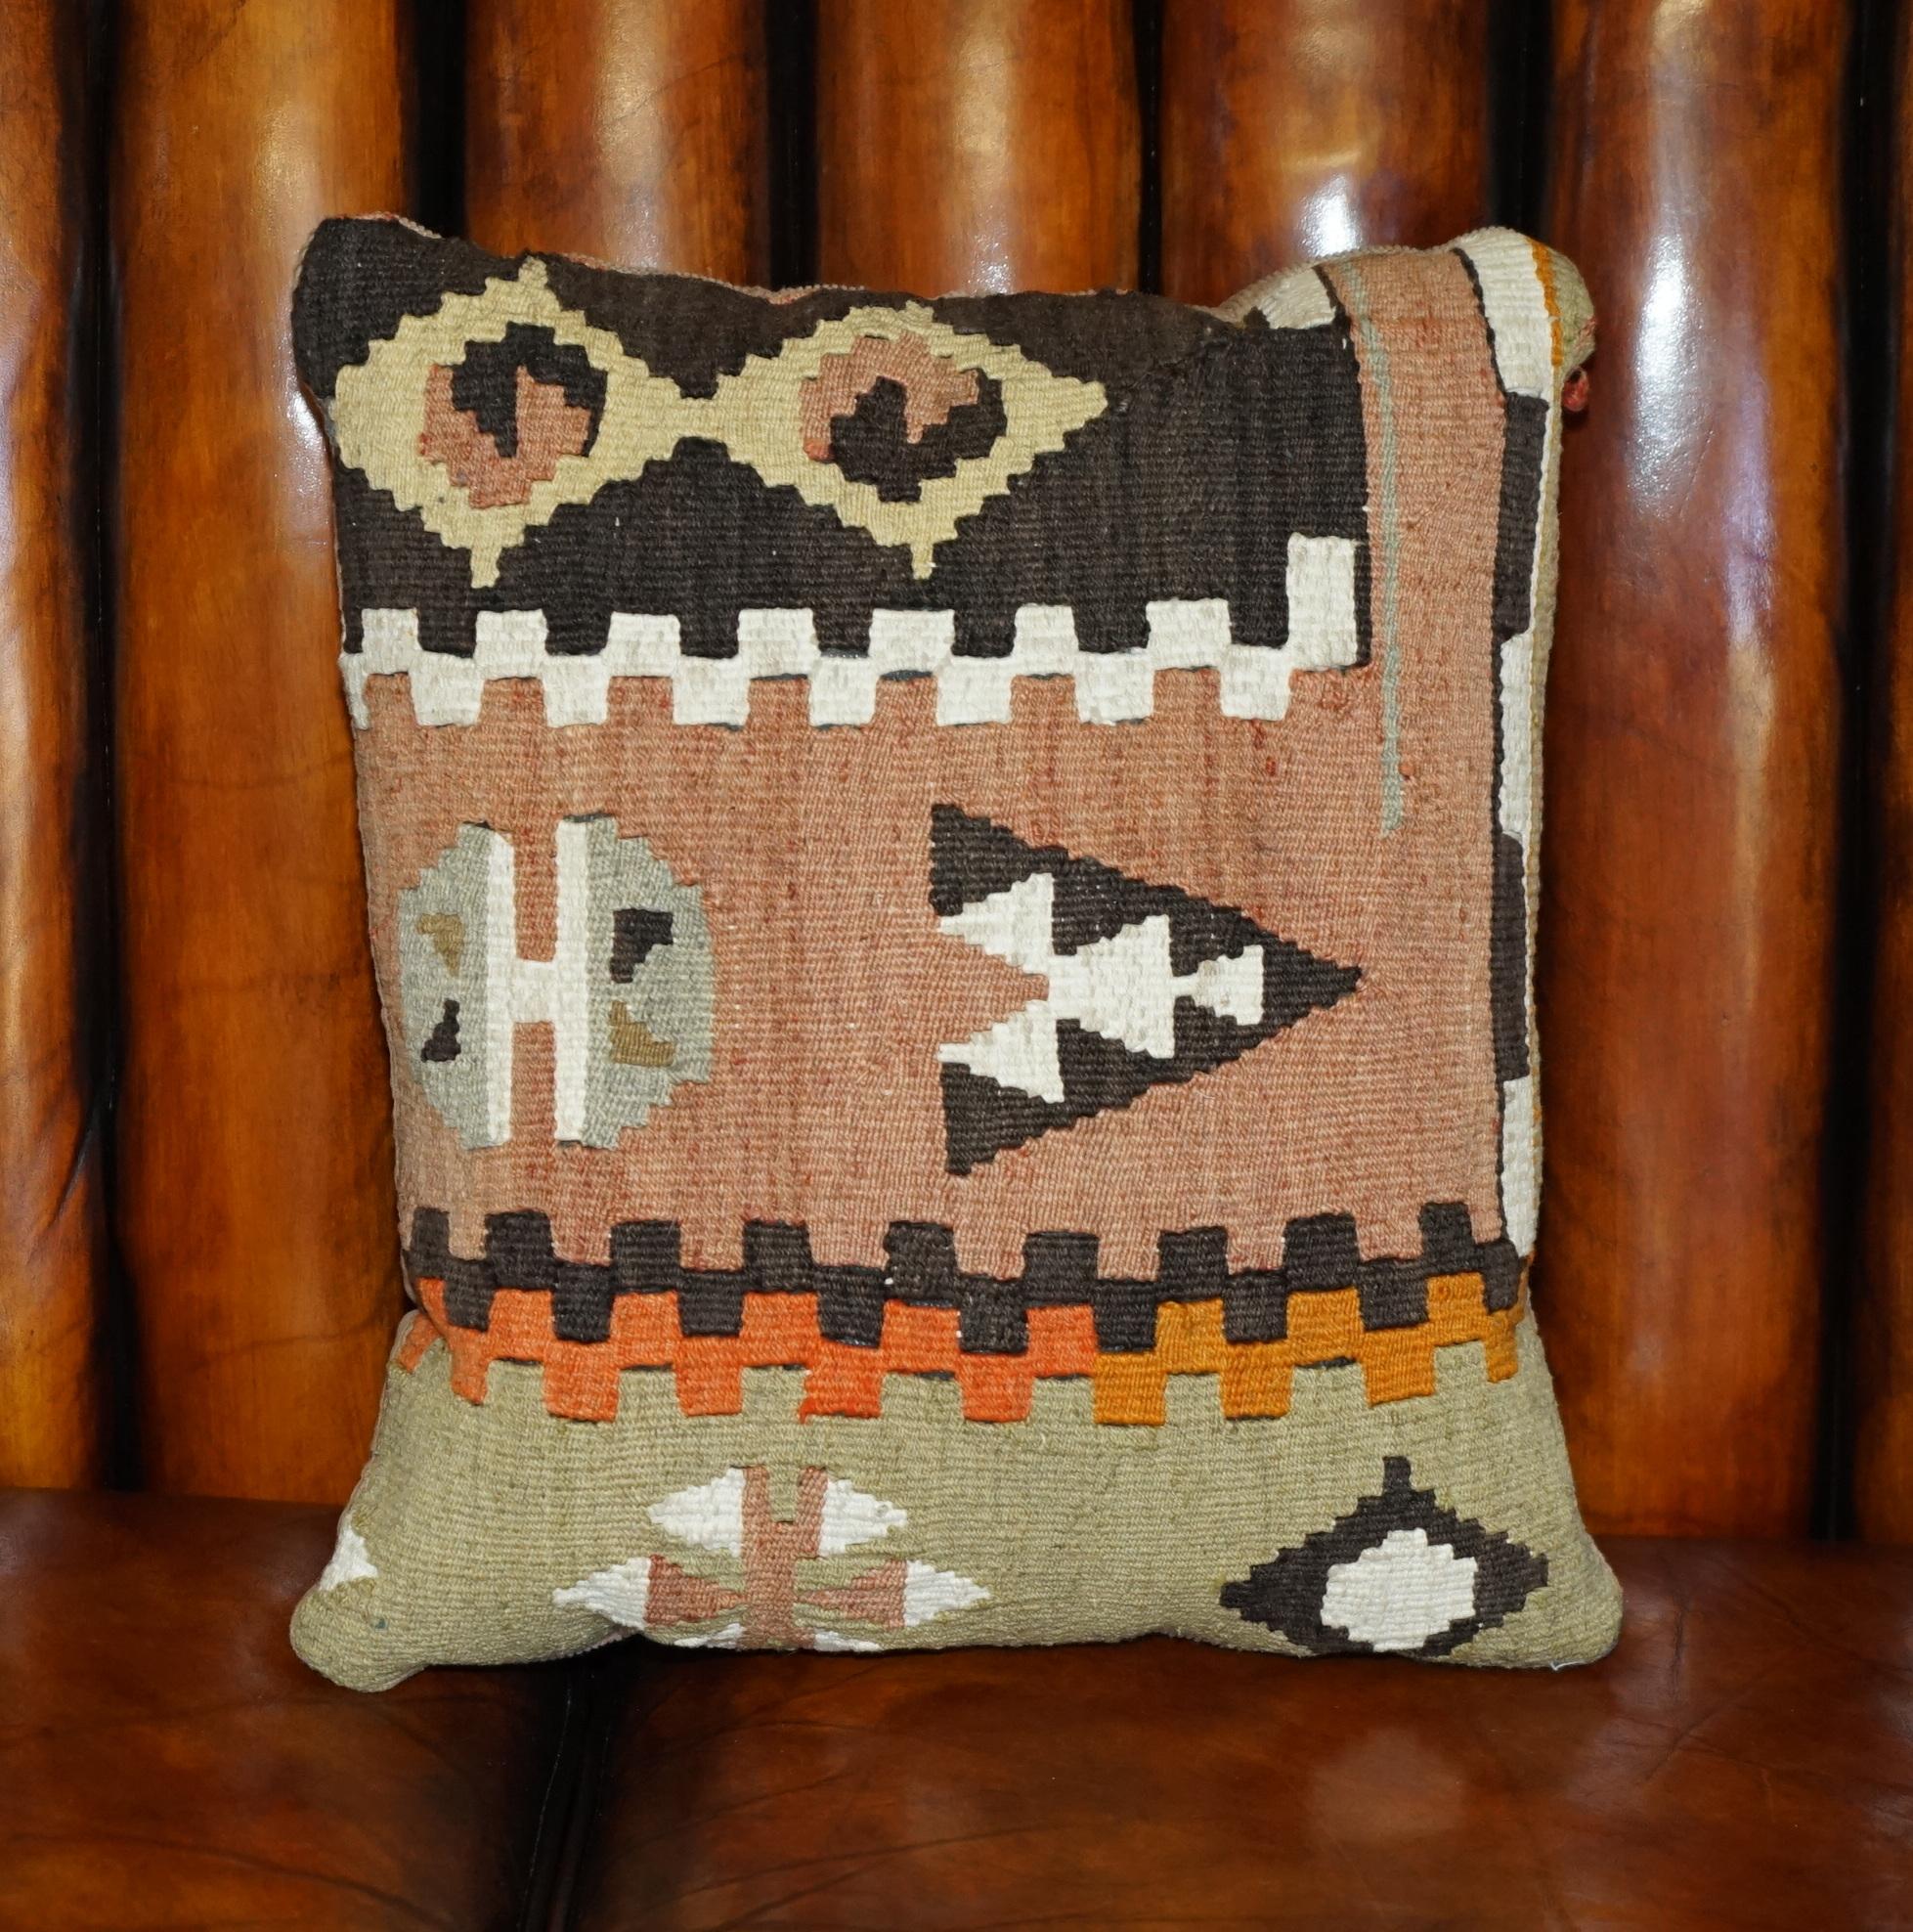 Royal House Antiques

Royal House Antiques is delighted to offer for sale this stunning original vintage George Smith Kilim Aztec Cushions 

These are super collectable, they came from a George Smith sofa which I have listed under my other items